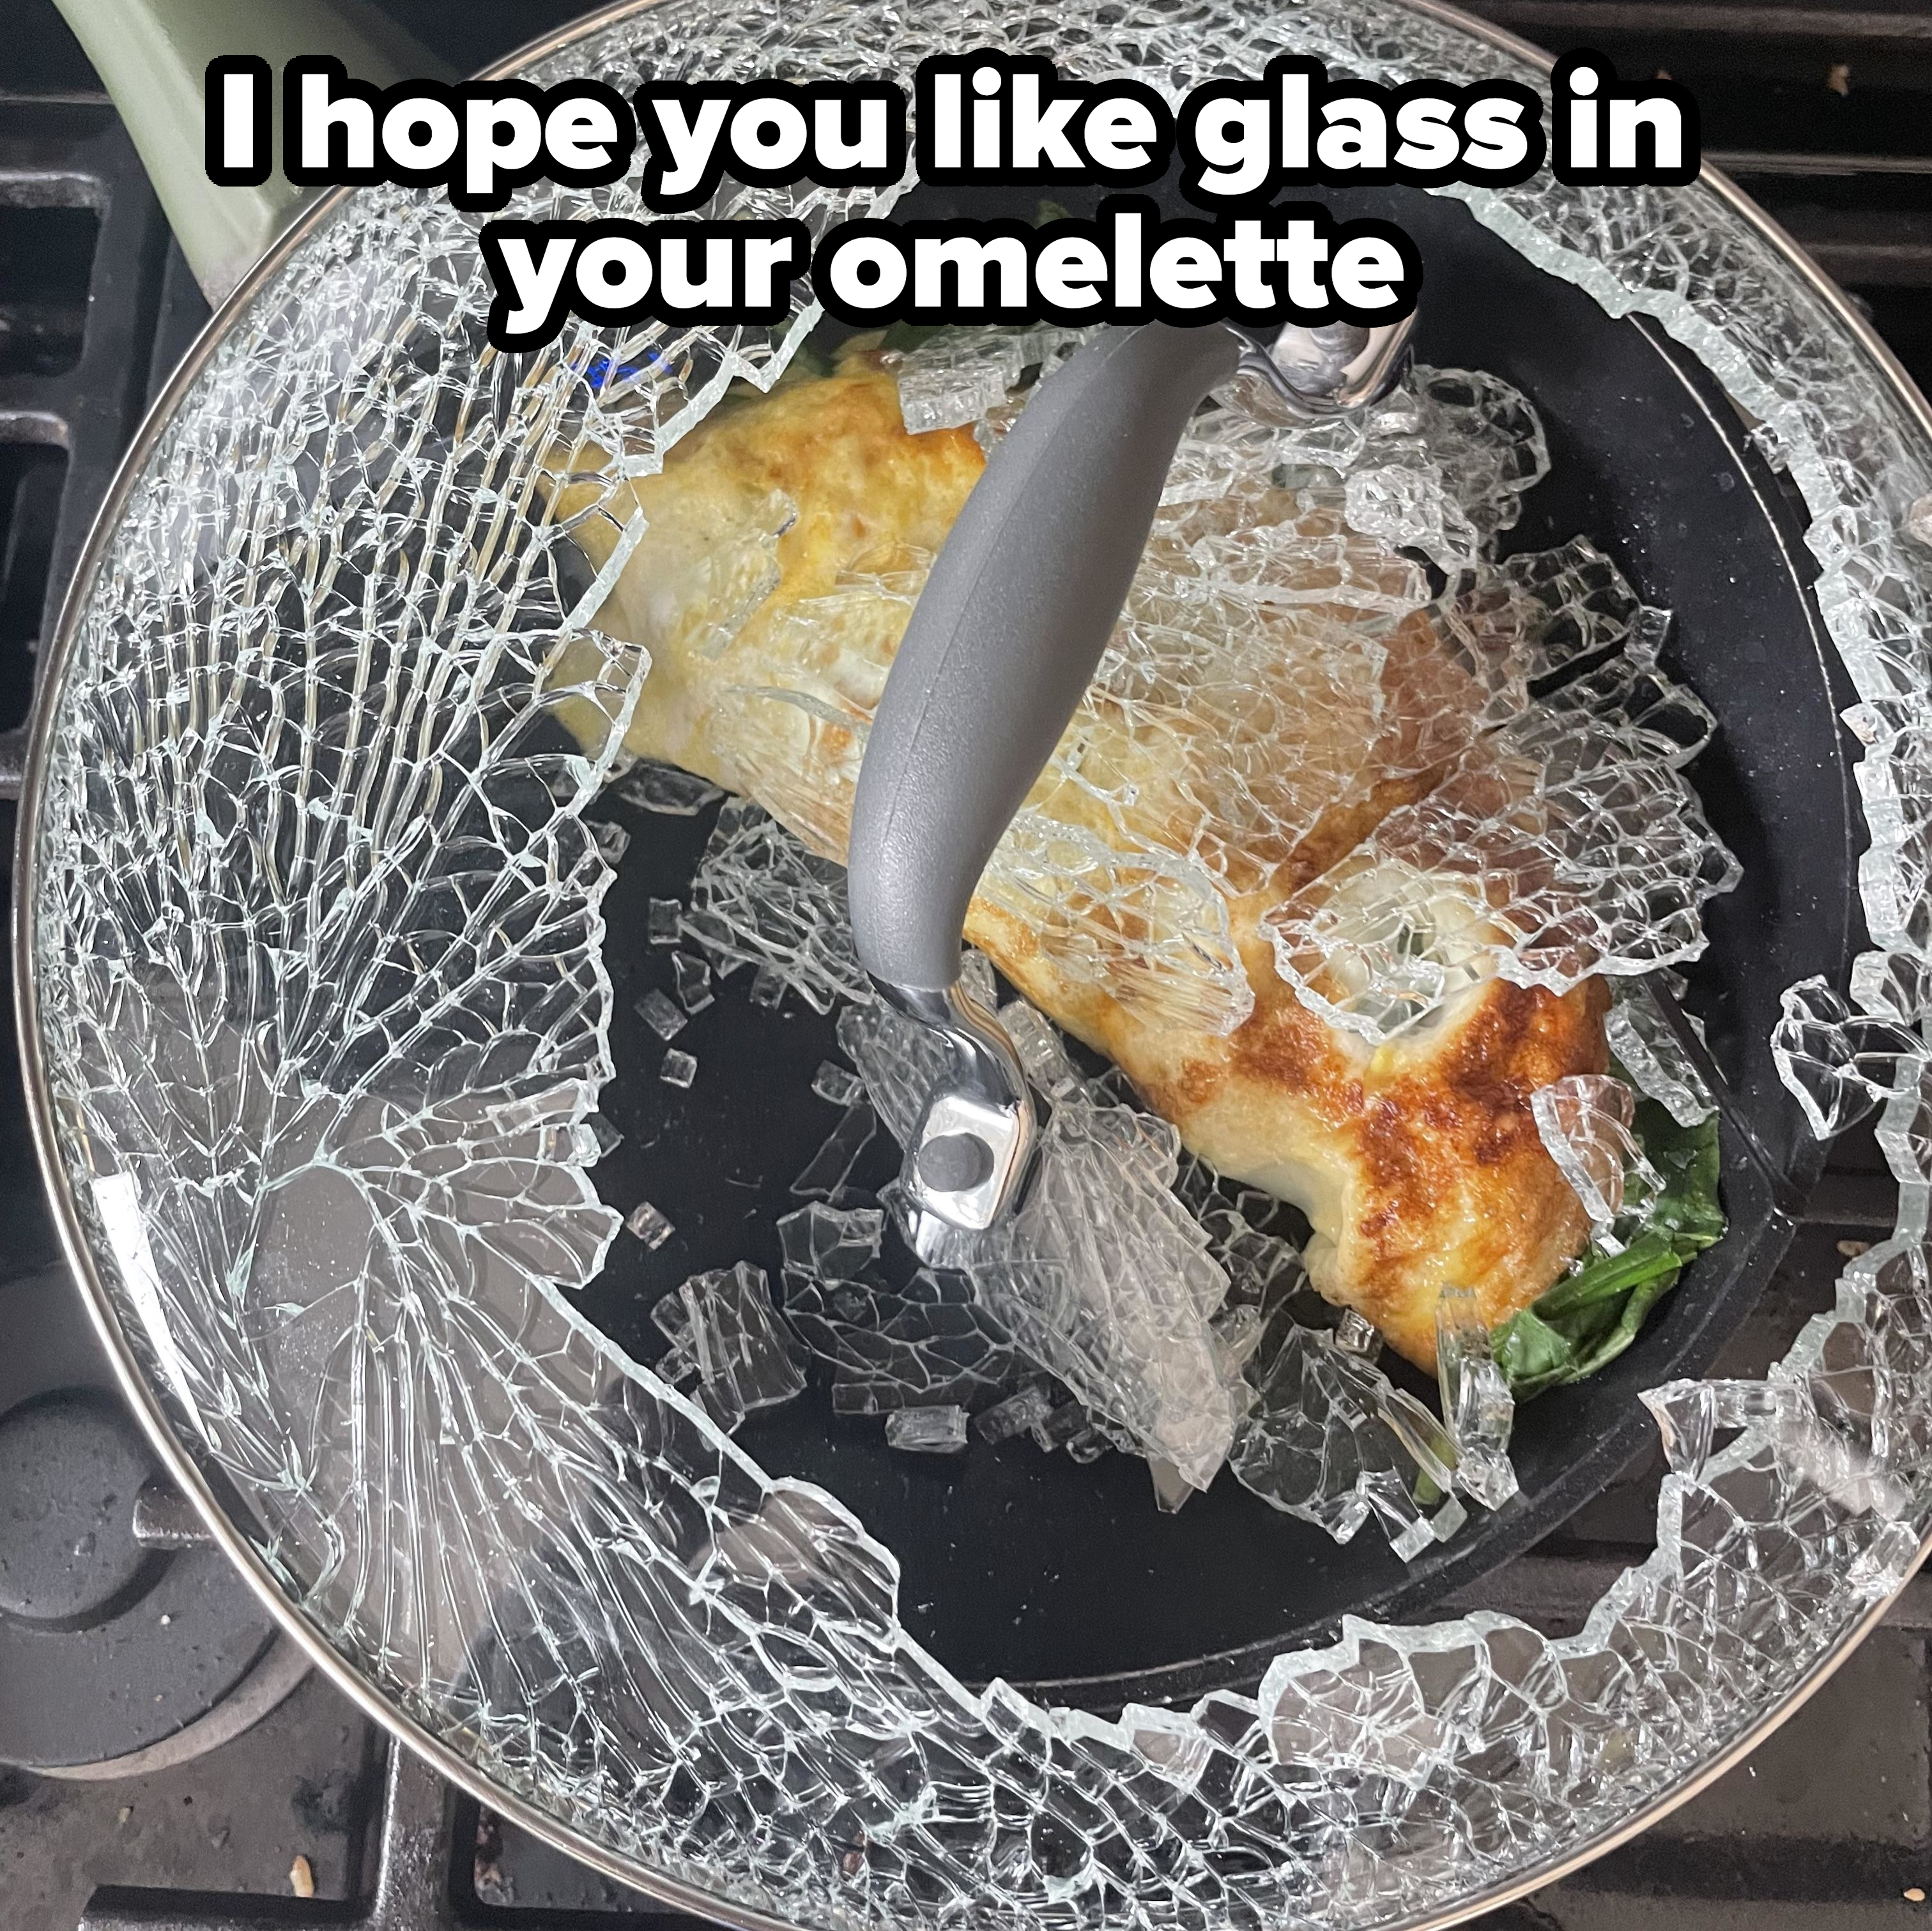 &quot;I hope you like glass in your omelette&quot;